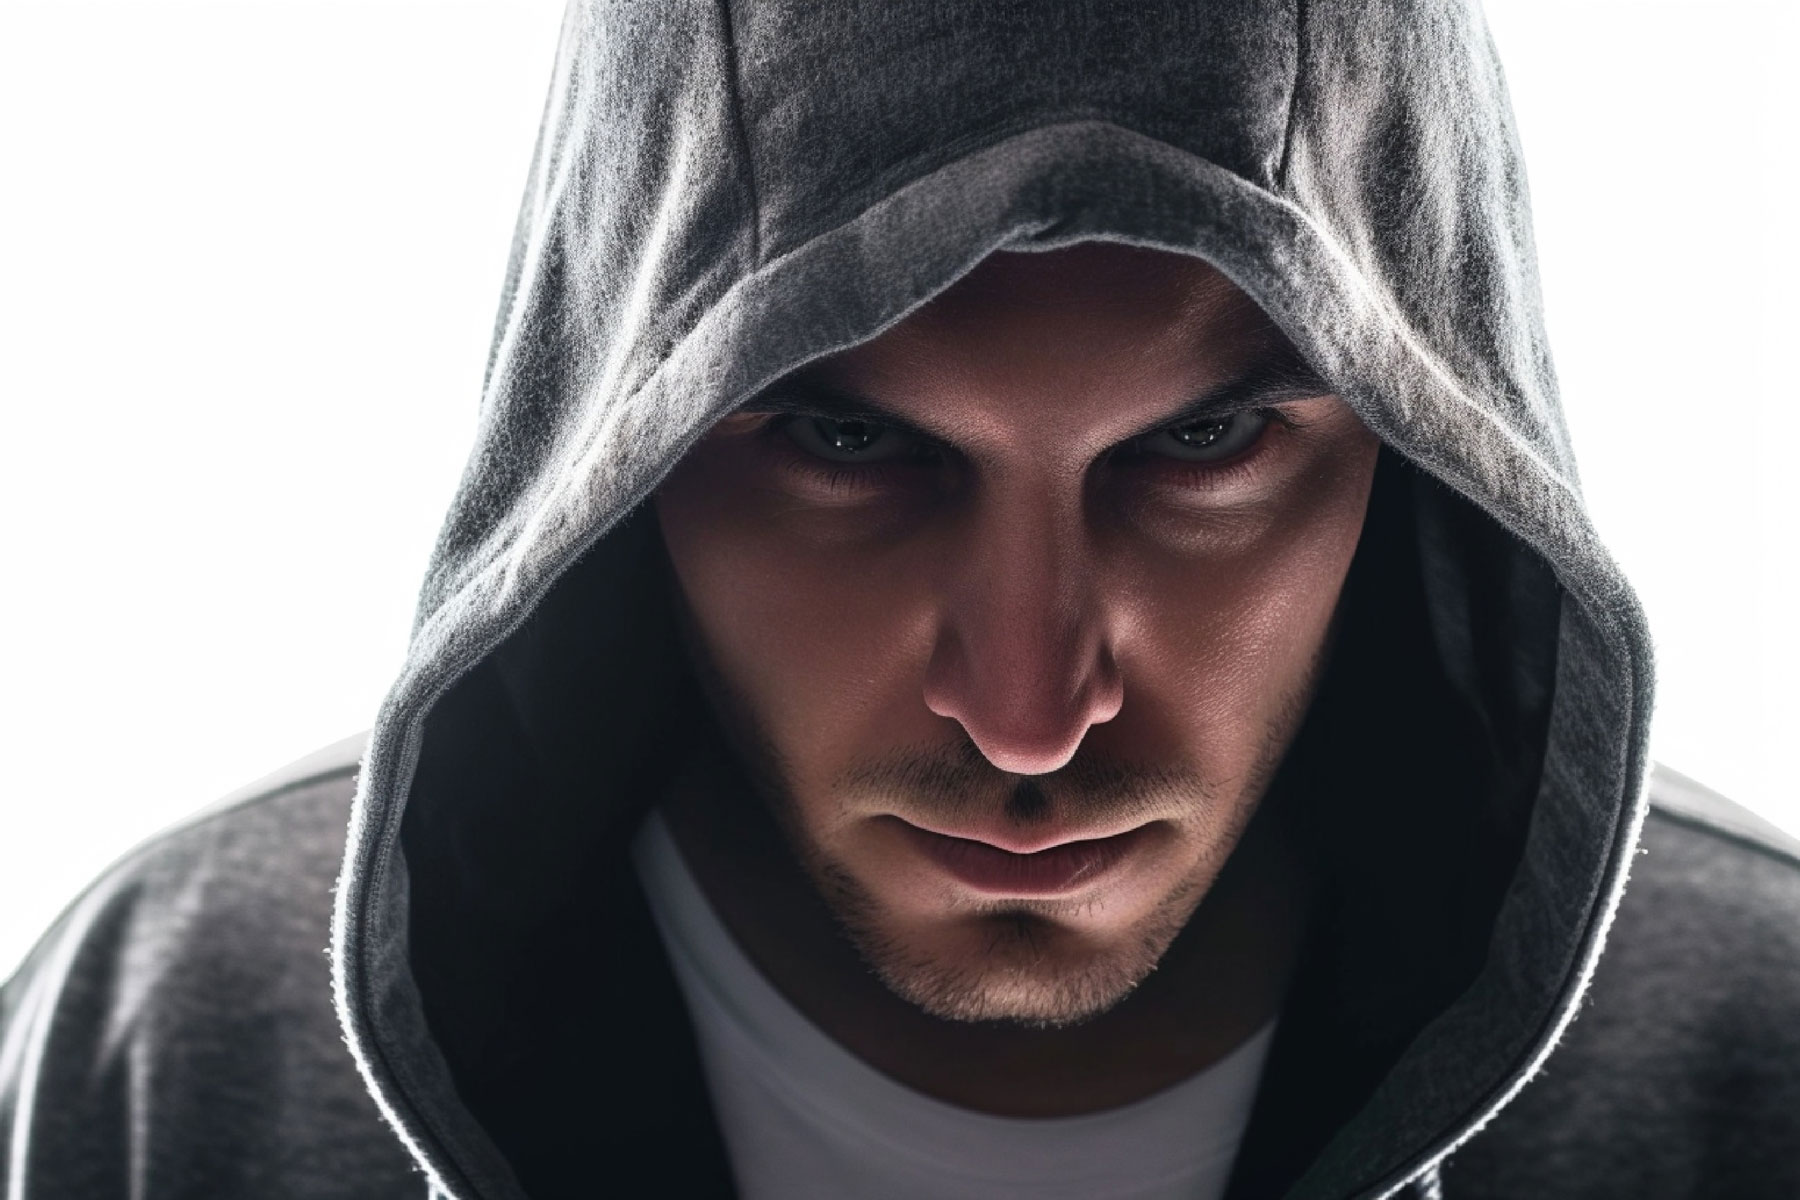 person in hoodie with stern look on face while struggling with substance use and developing heroin sores